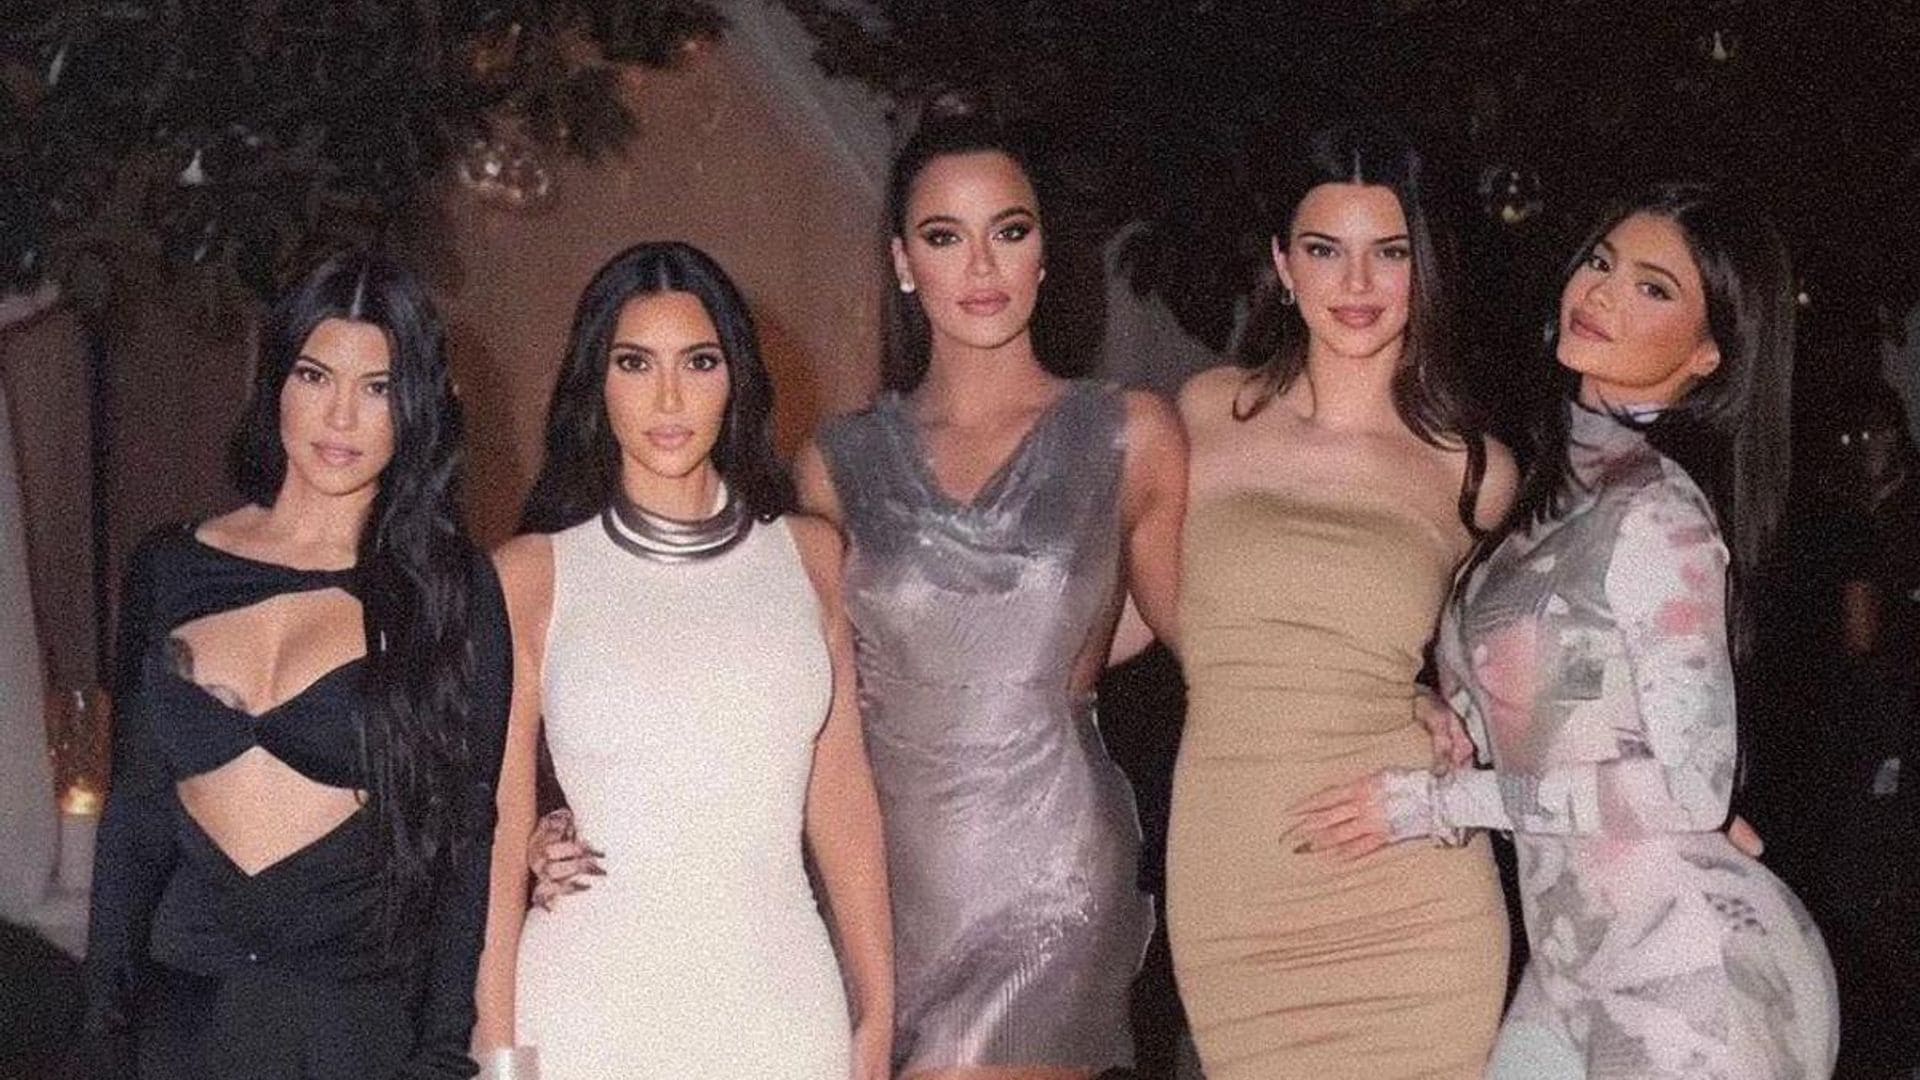 Khloé Kardashian’s sisters were livid after finding out about Tristan Thompson’s paternity scandal